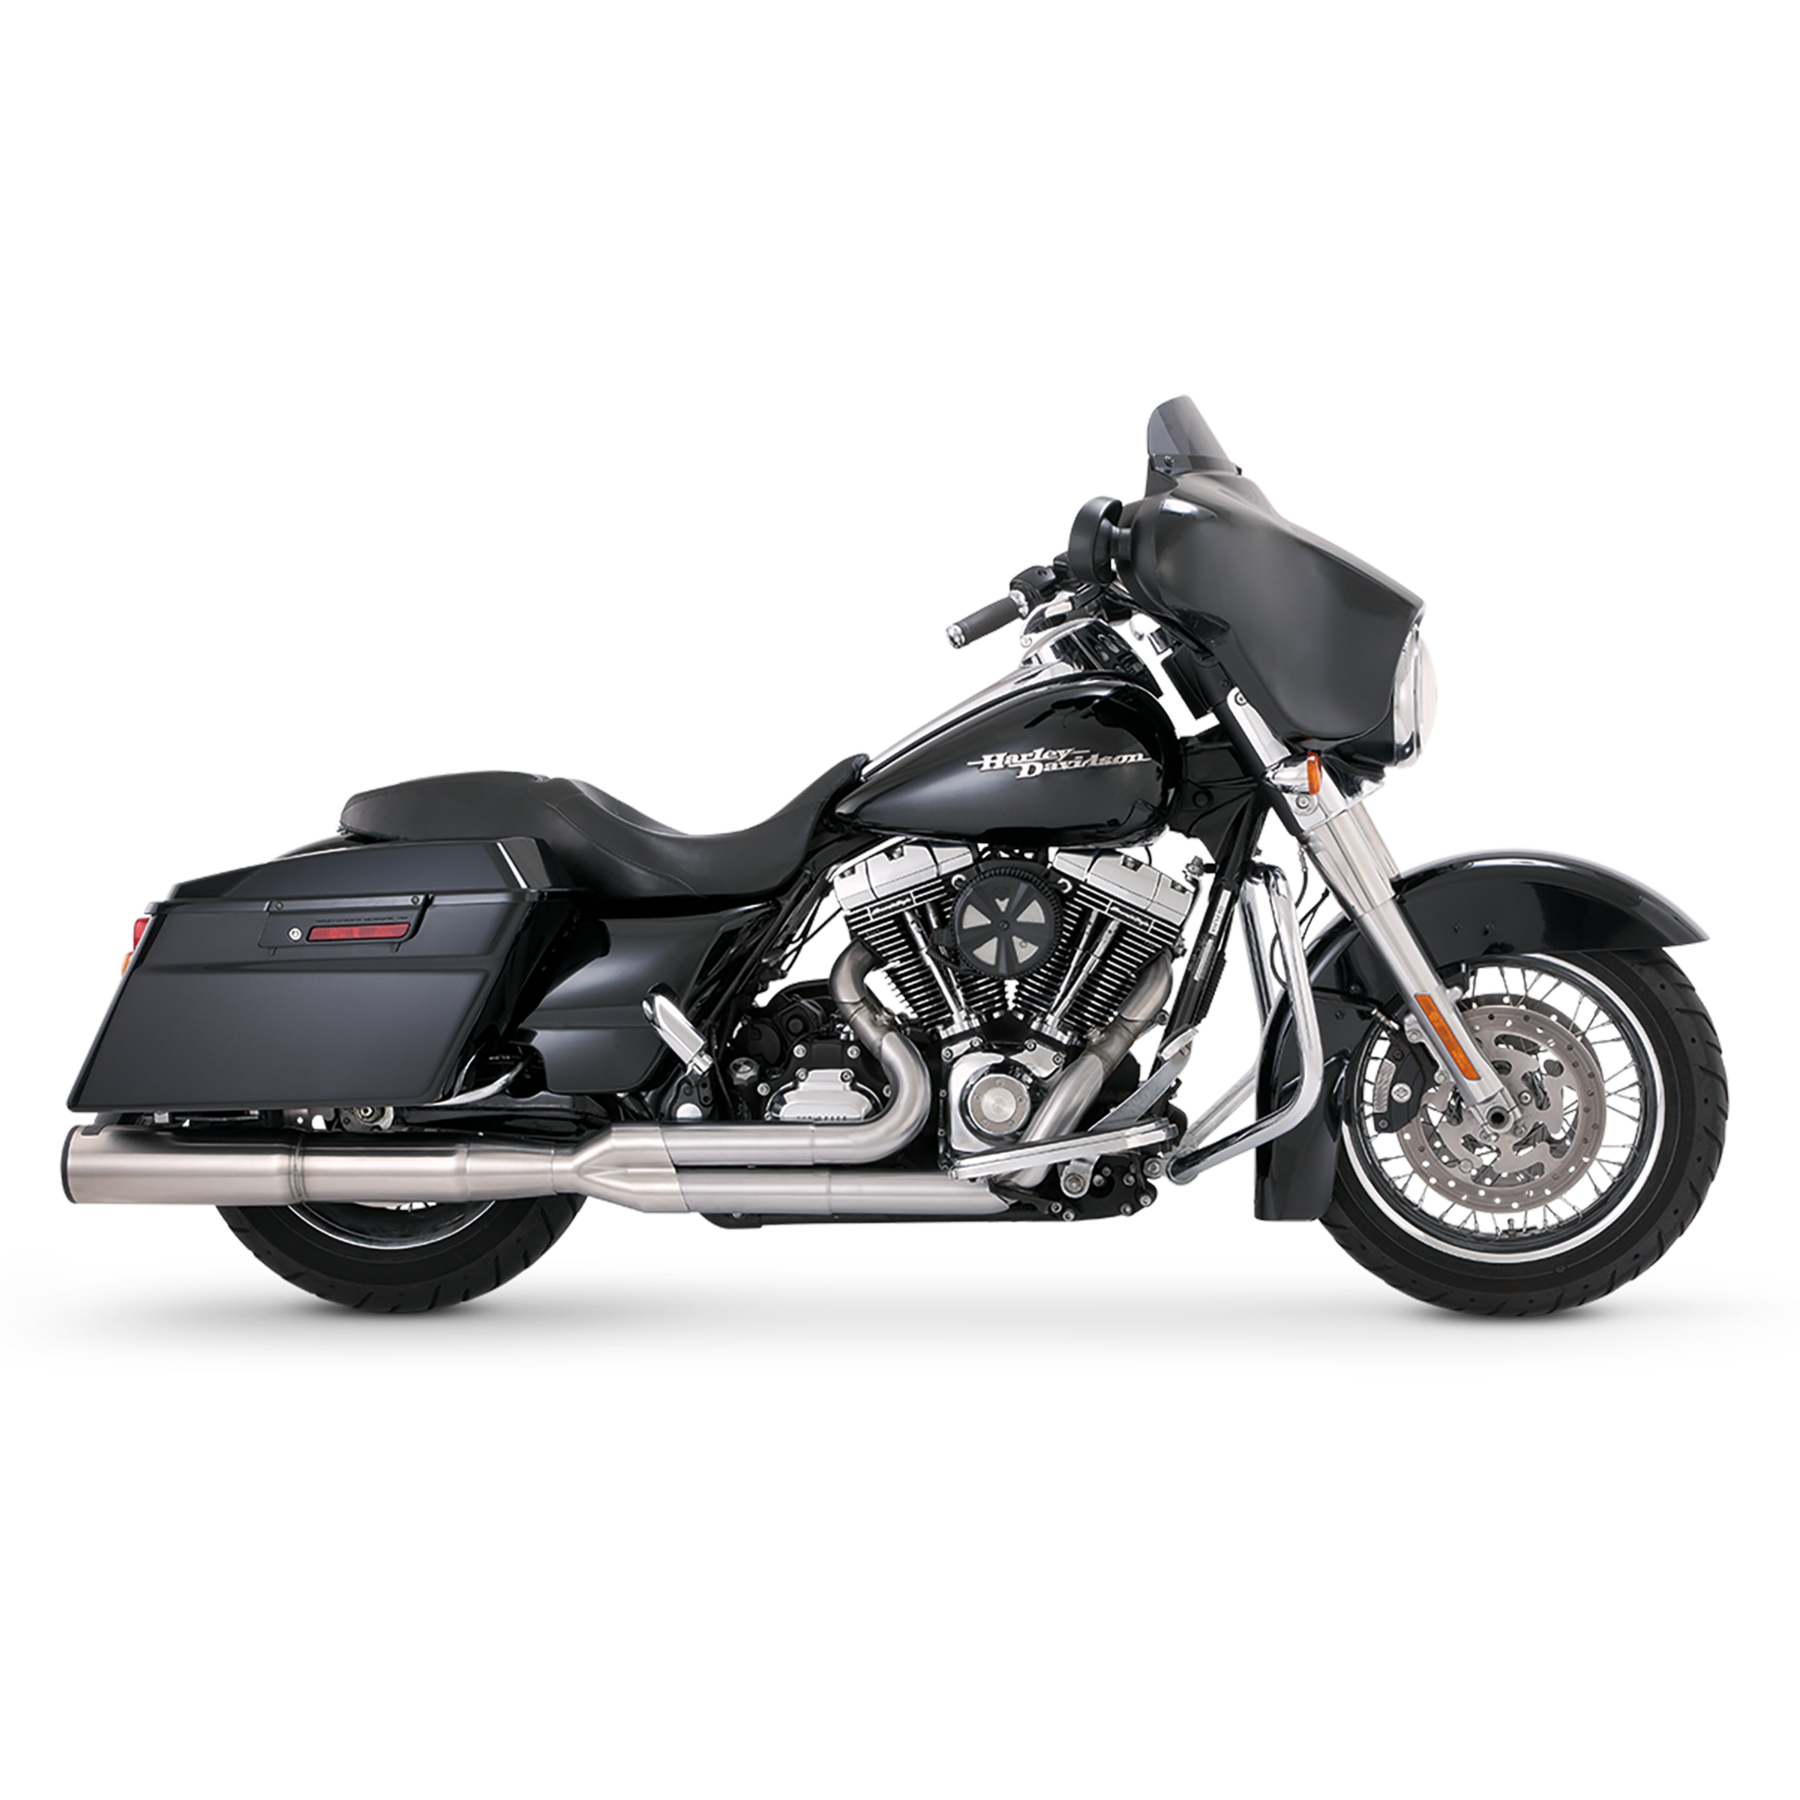 VANCE & HINES STAINLESS HI-OUTPUT 2-INTO-1